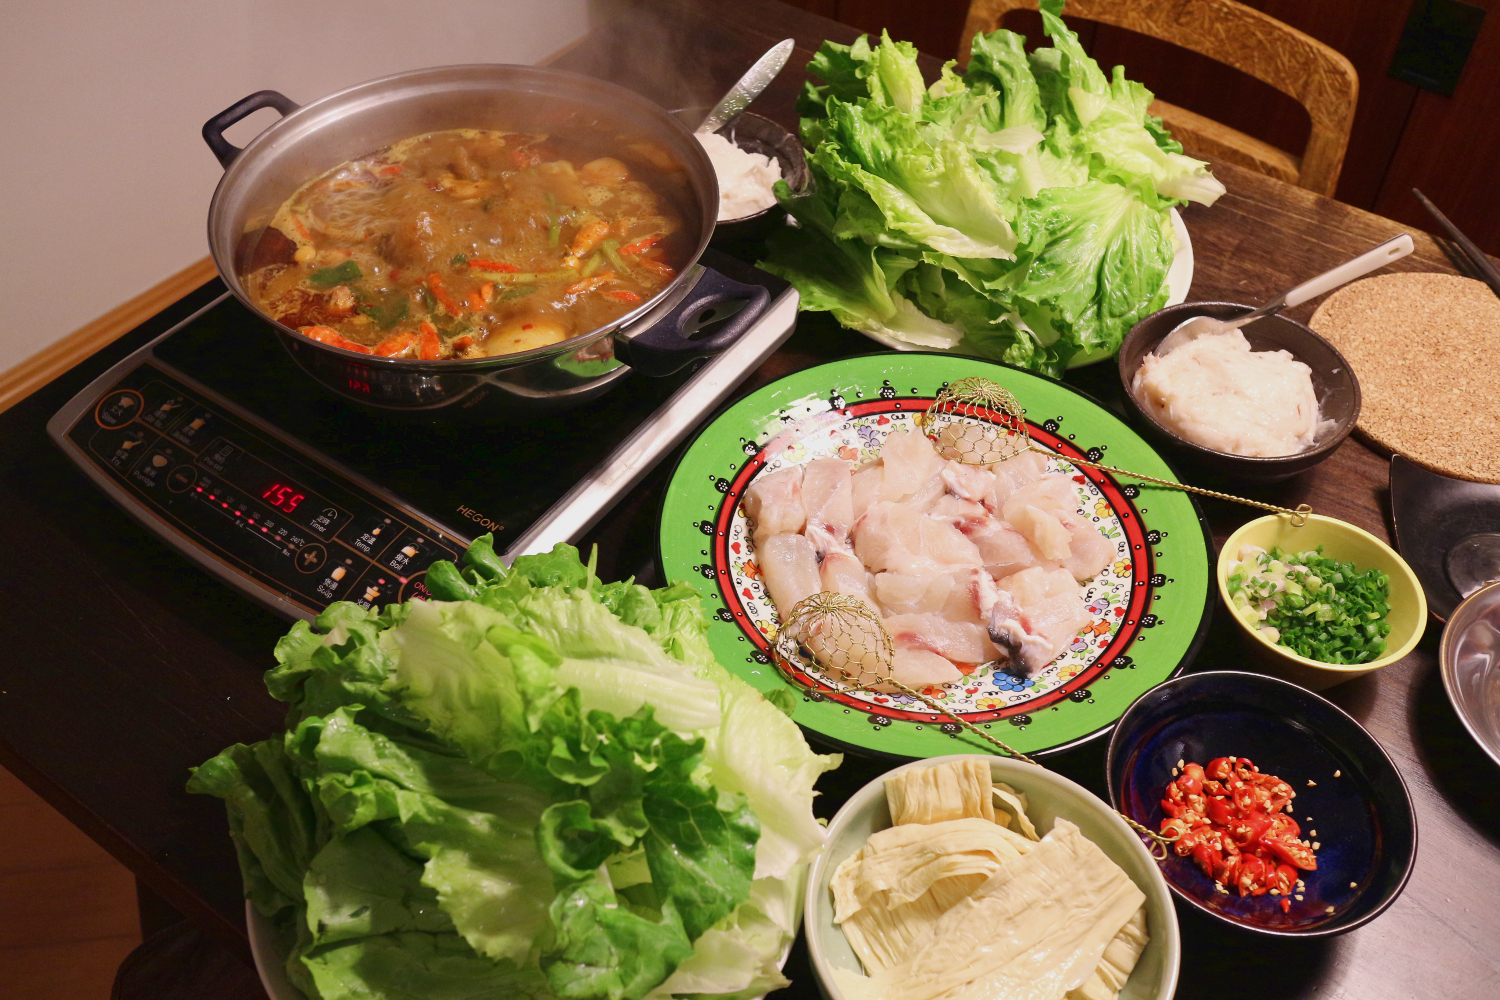 Spicy hotpot with all the condiments. Image by Piera Chen / londoninfopage